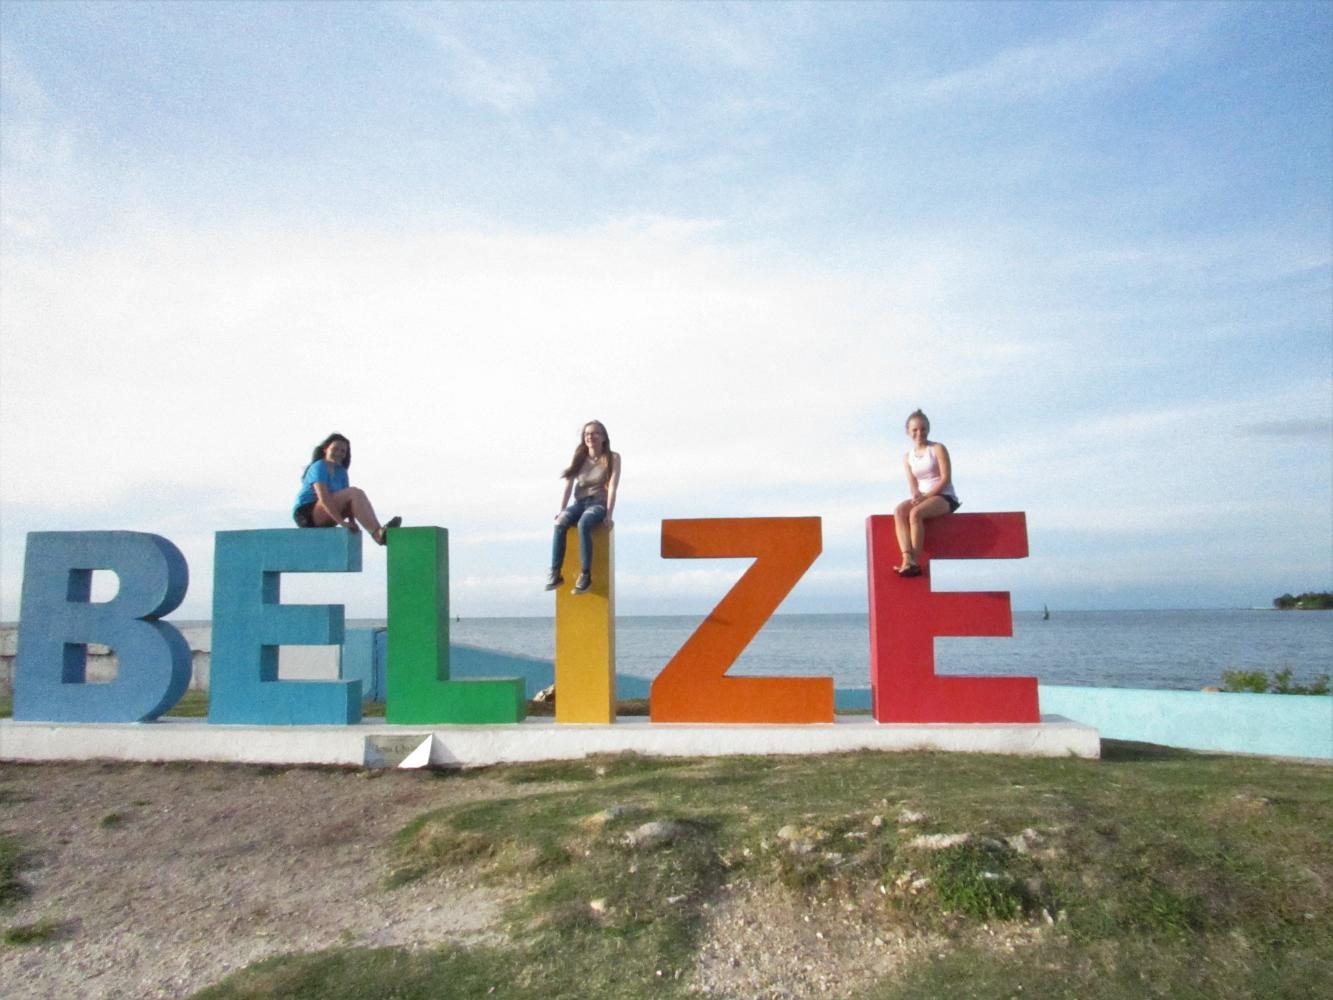 The+Belize+sign+in+Belize+City+stood+along+the+coast.